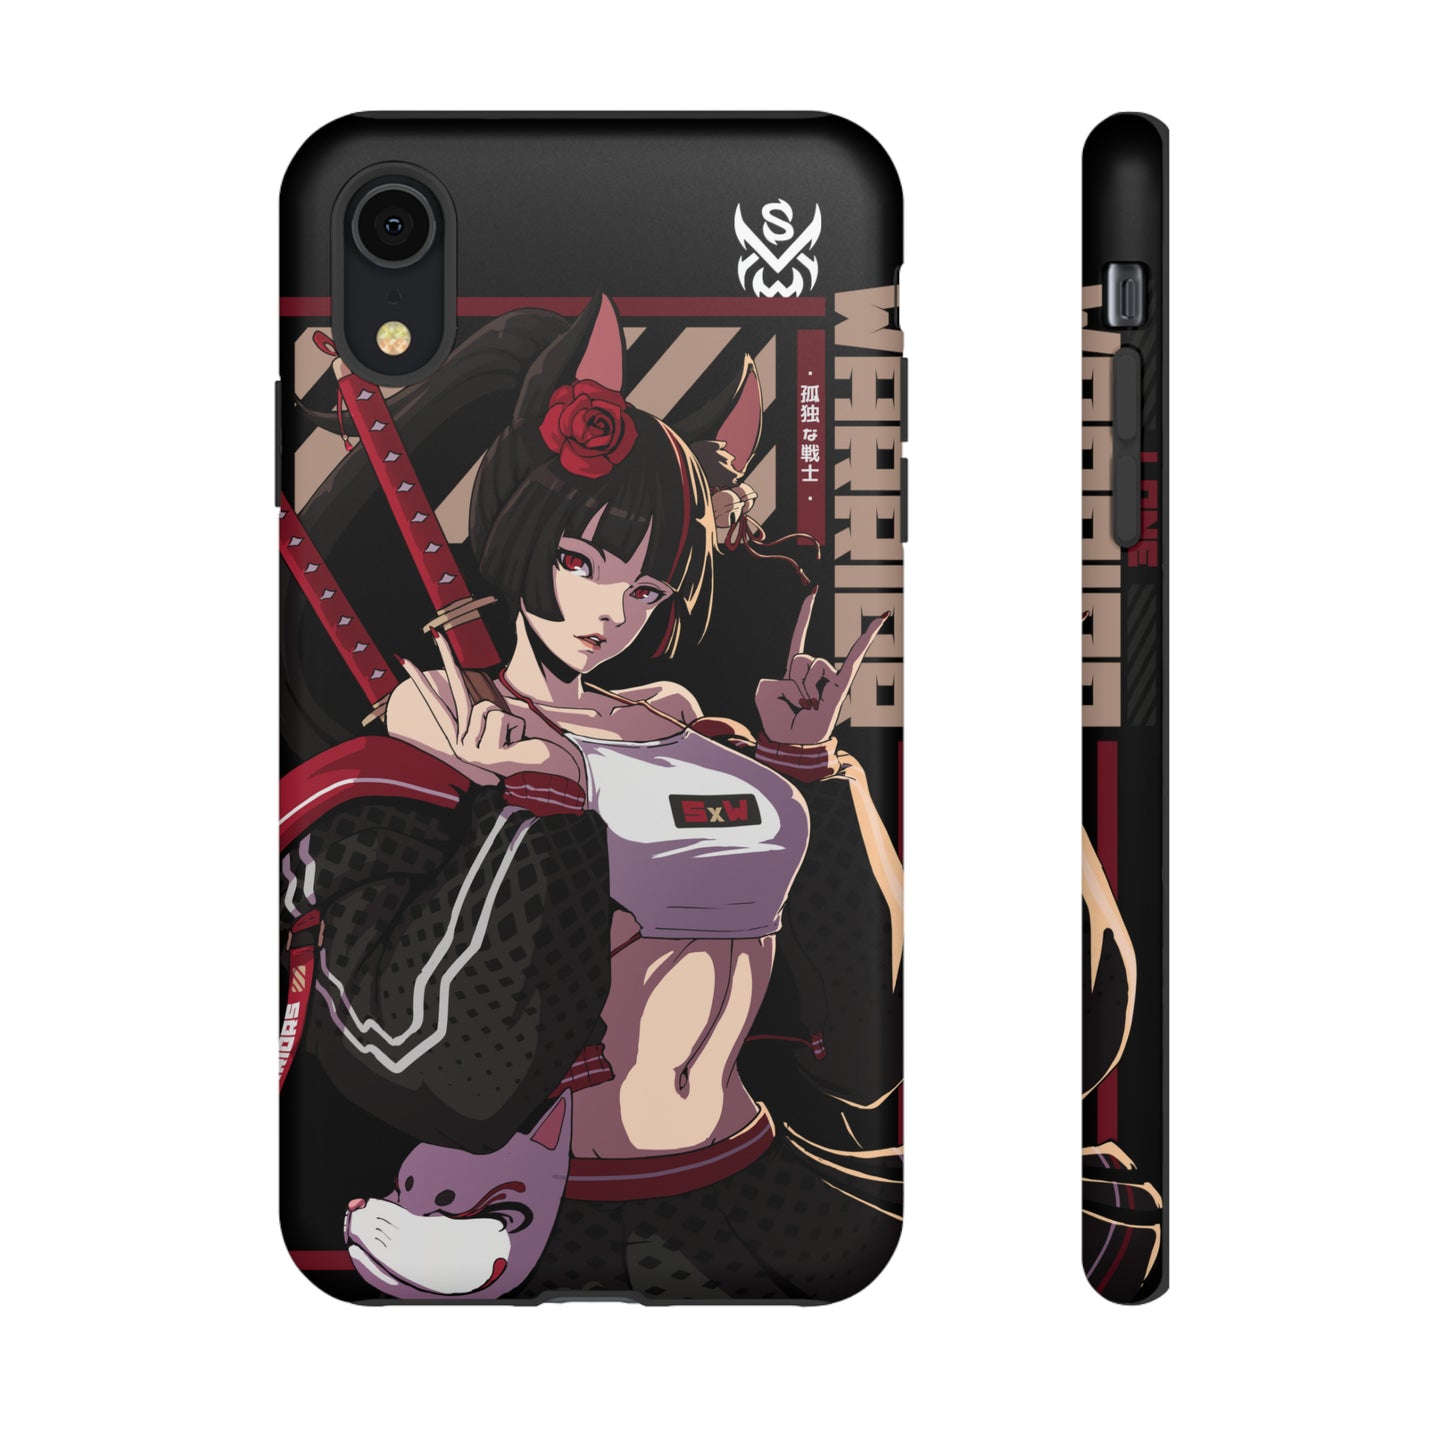 Lone Warrior / iPhone Case - LIMITED